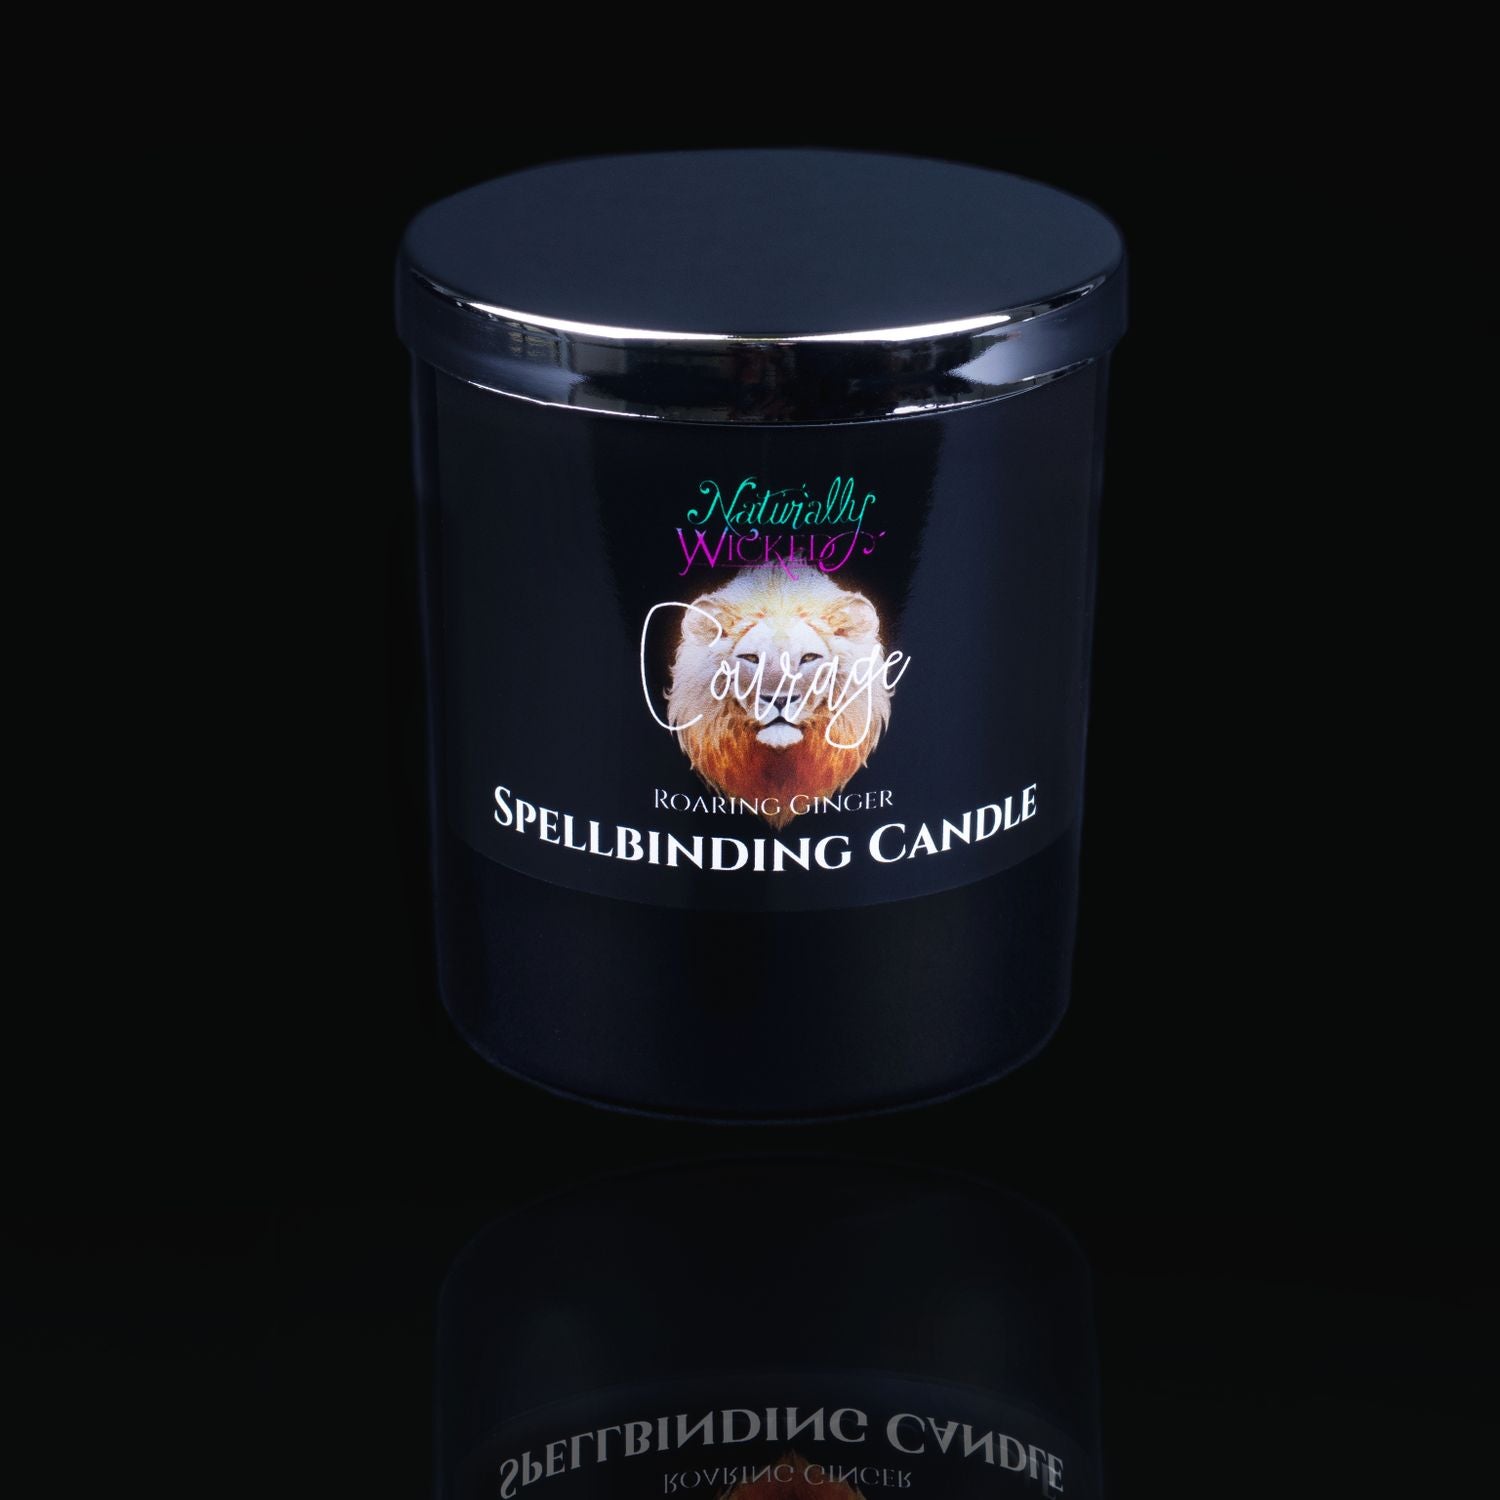 The Perfect Gift Of Courage. Naturally Wicked Spellbinding Courage Spell Candle With Mirror Finished Exquisite Lid In Place. Featuring A Black Gloss Label And A Roaring Ginger Lion 